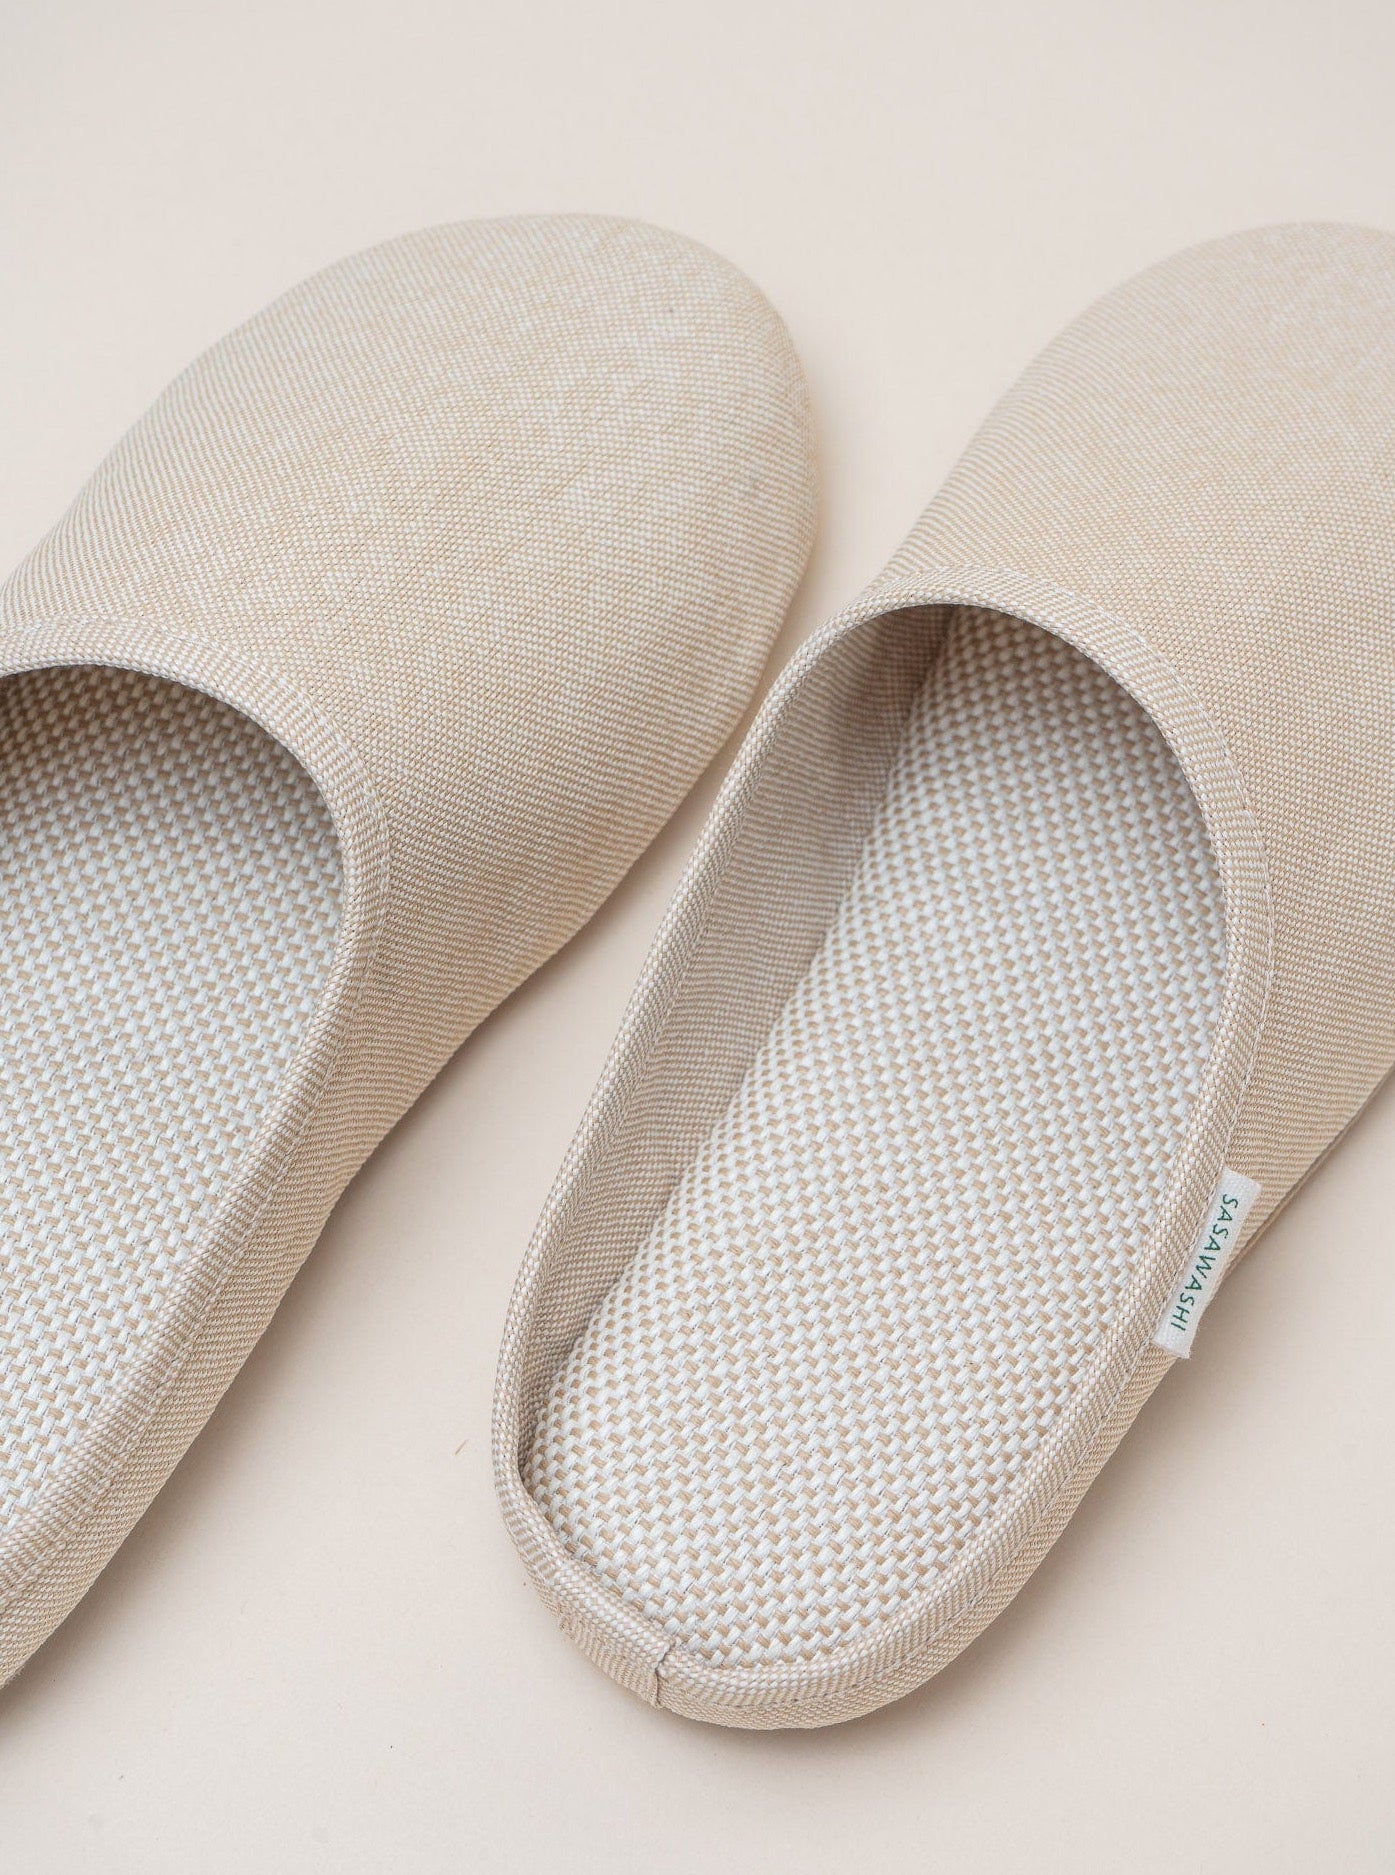 A pair of breathable beige Sasawashi Room Shoes made with Sasawashi fabric on a white surface.